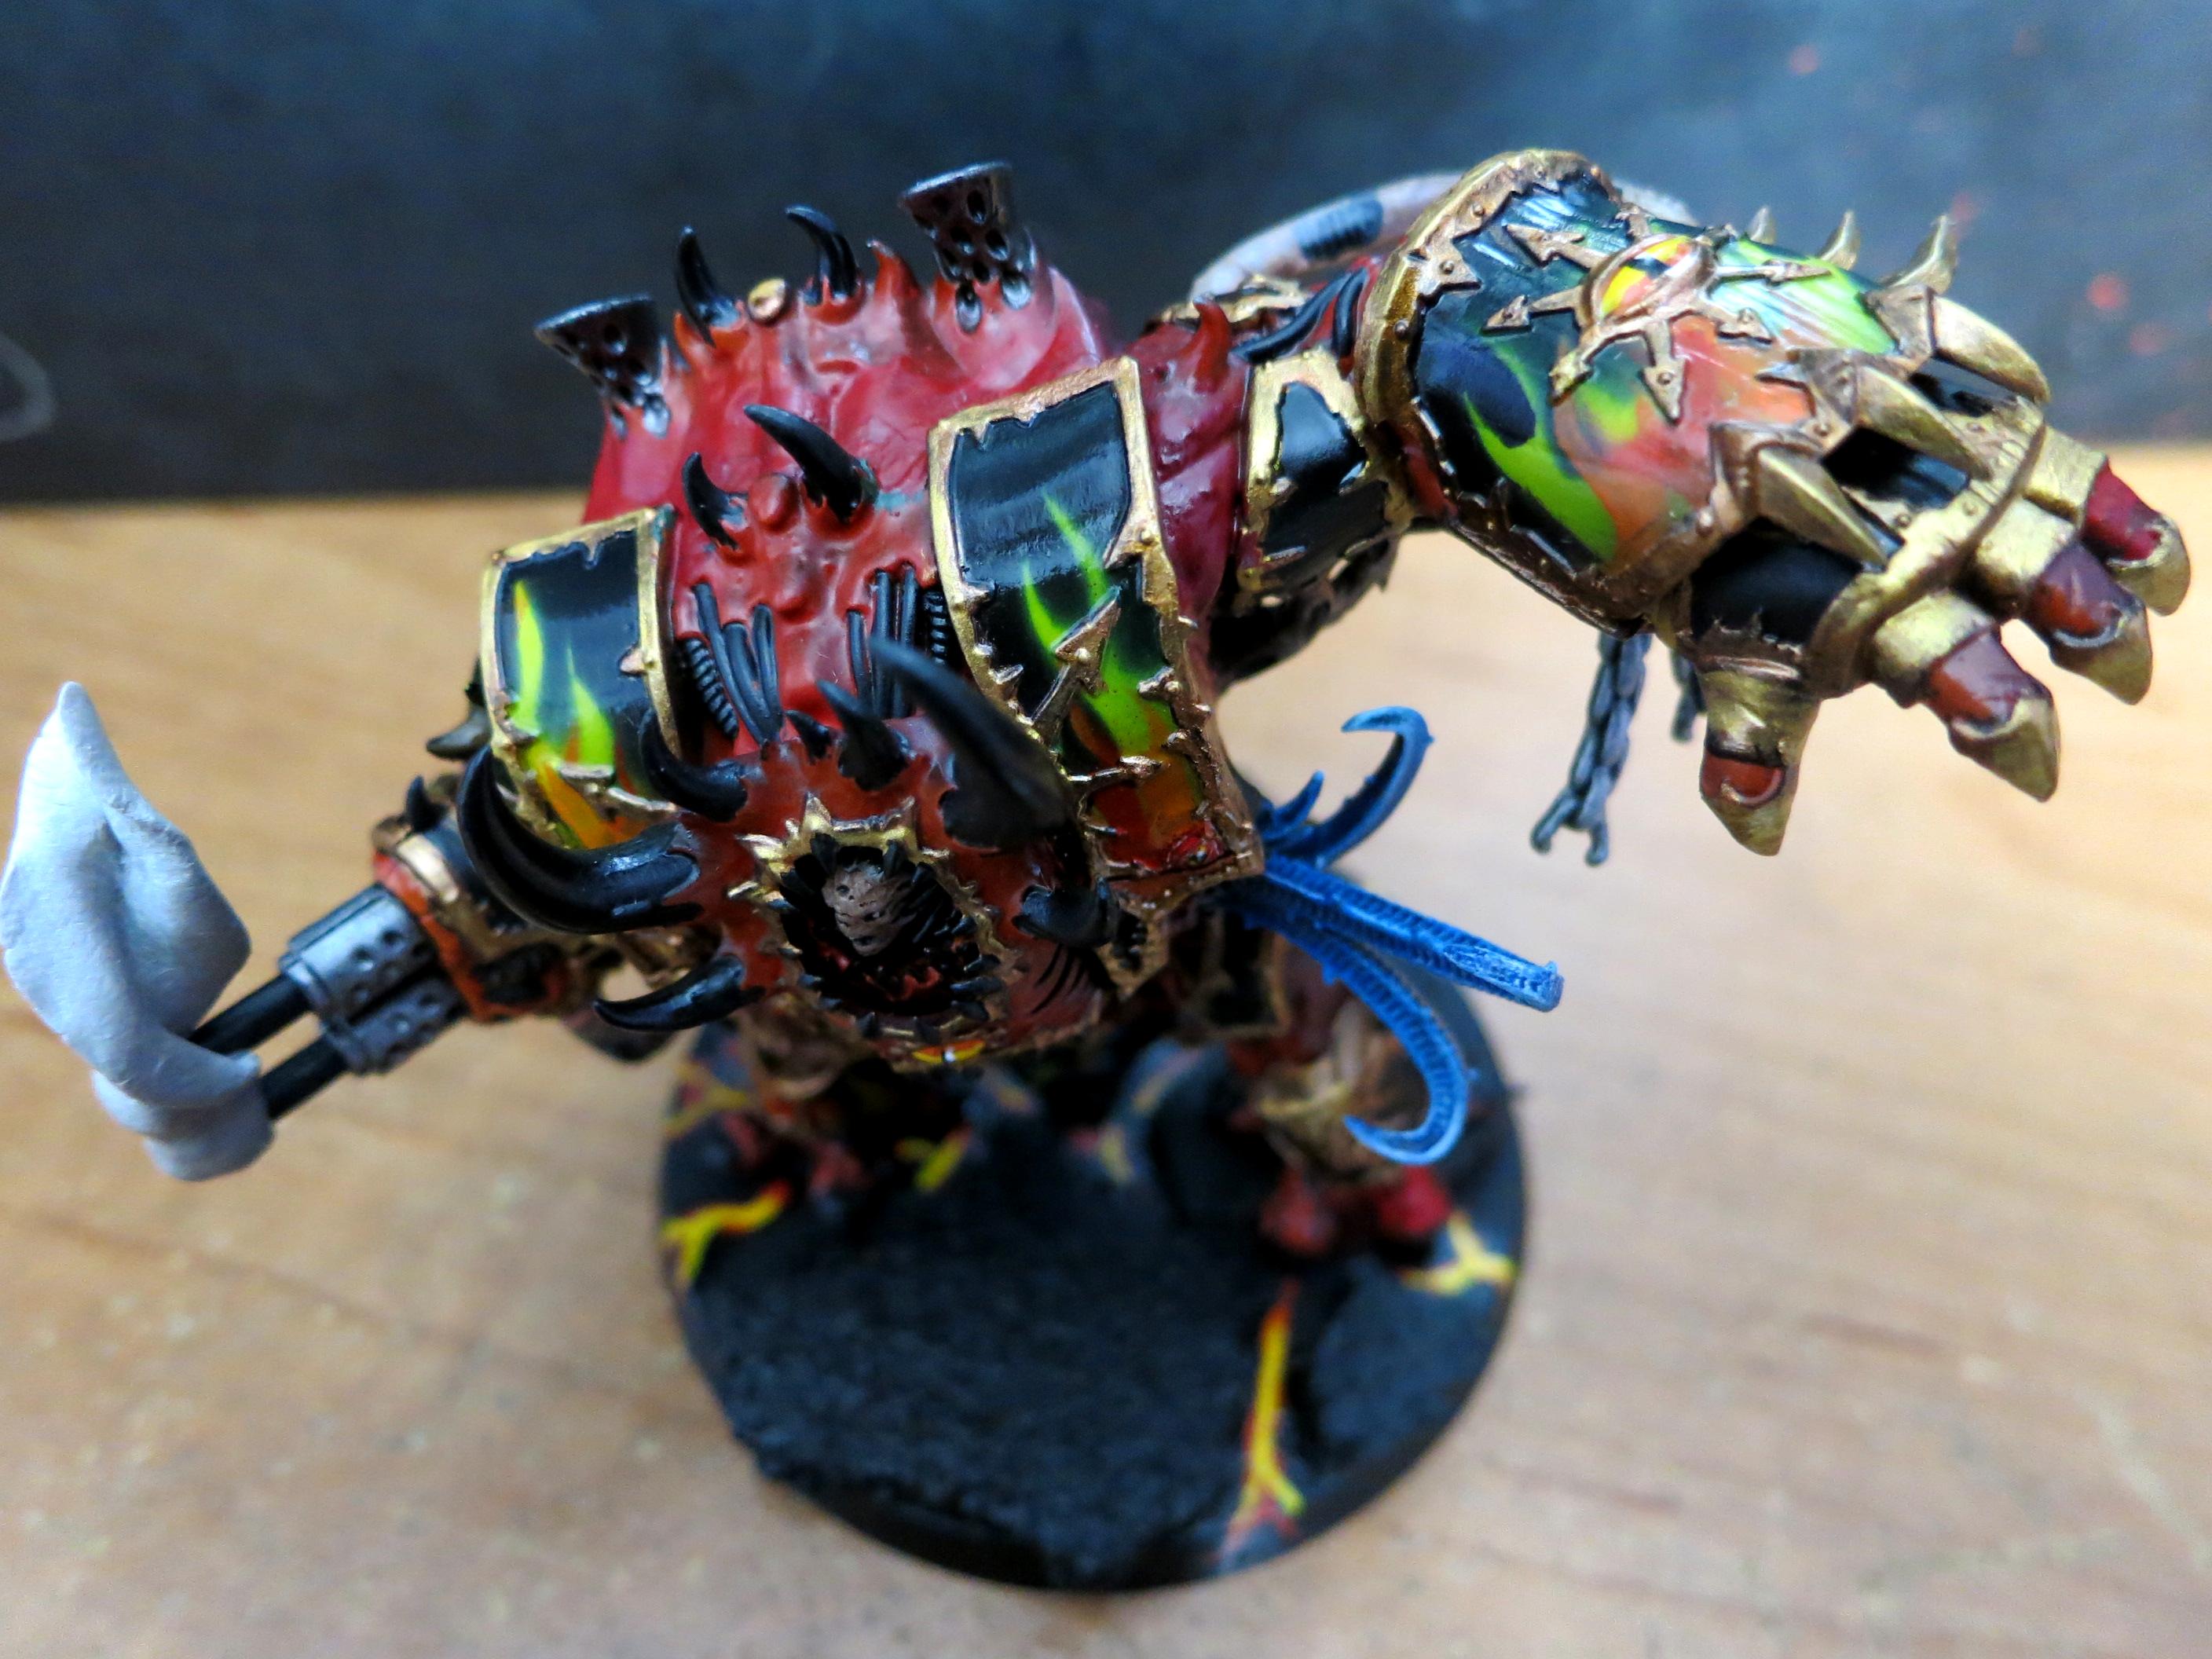 Airbrush, Awesome, Chaos, Chaos Space Marines, Dark, Evil, Flames, Helbrute, Hell, Hellbrute, Lava, Smoke, Vengeance, Warhammer 40,000